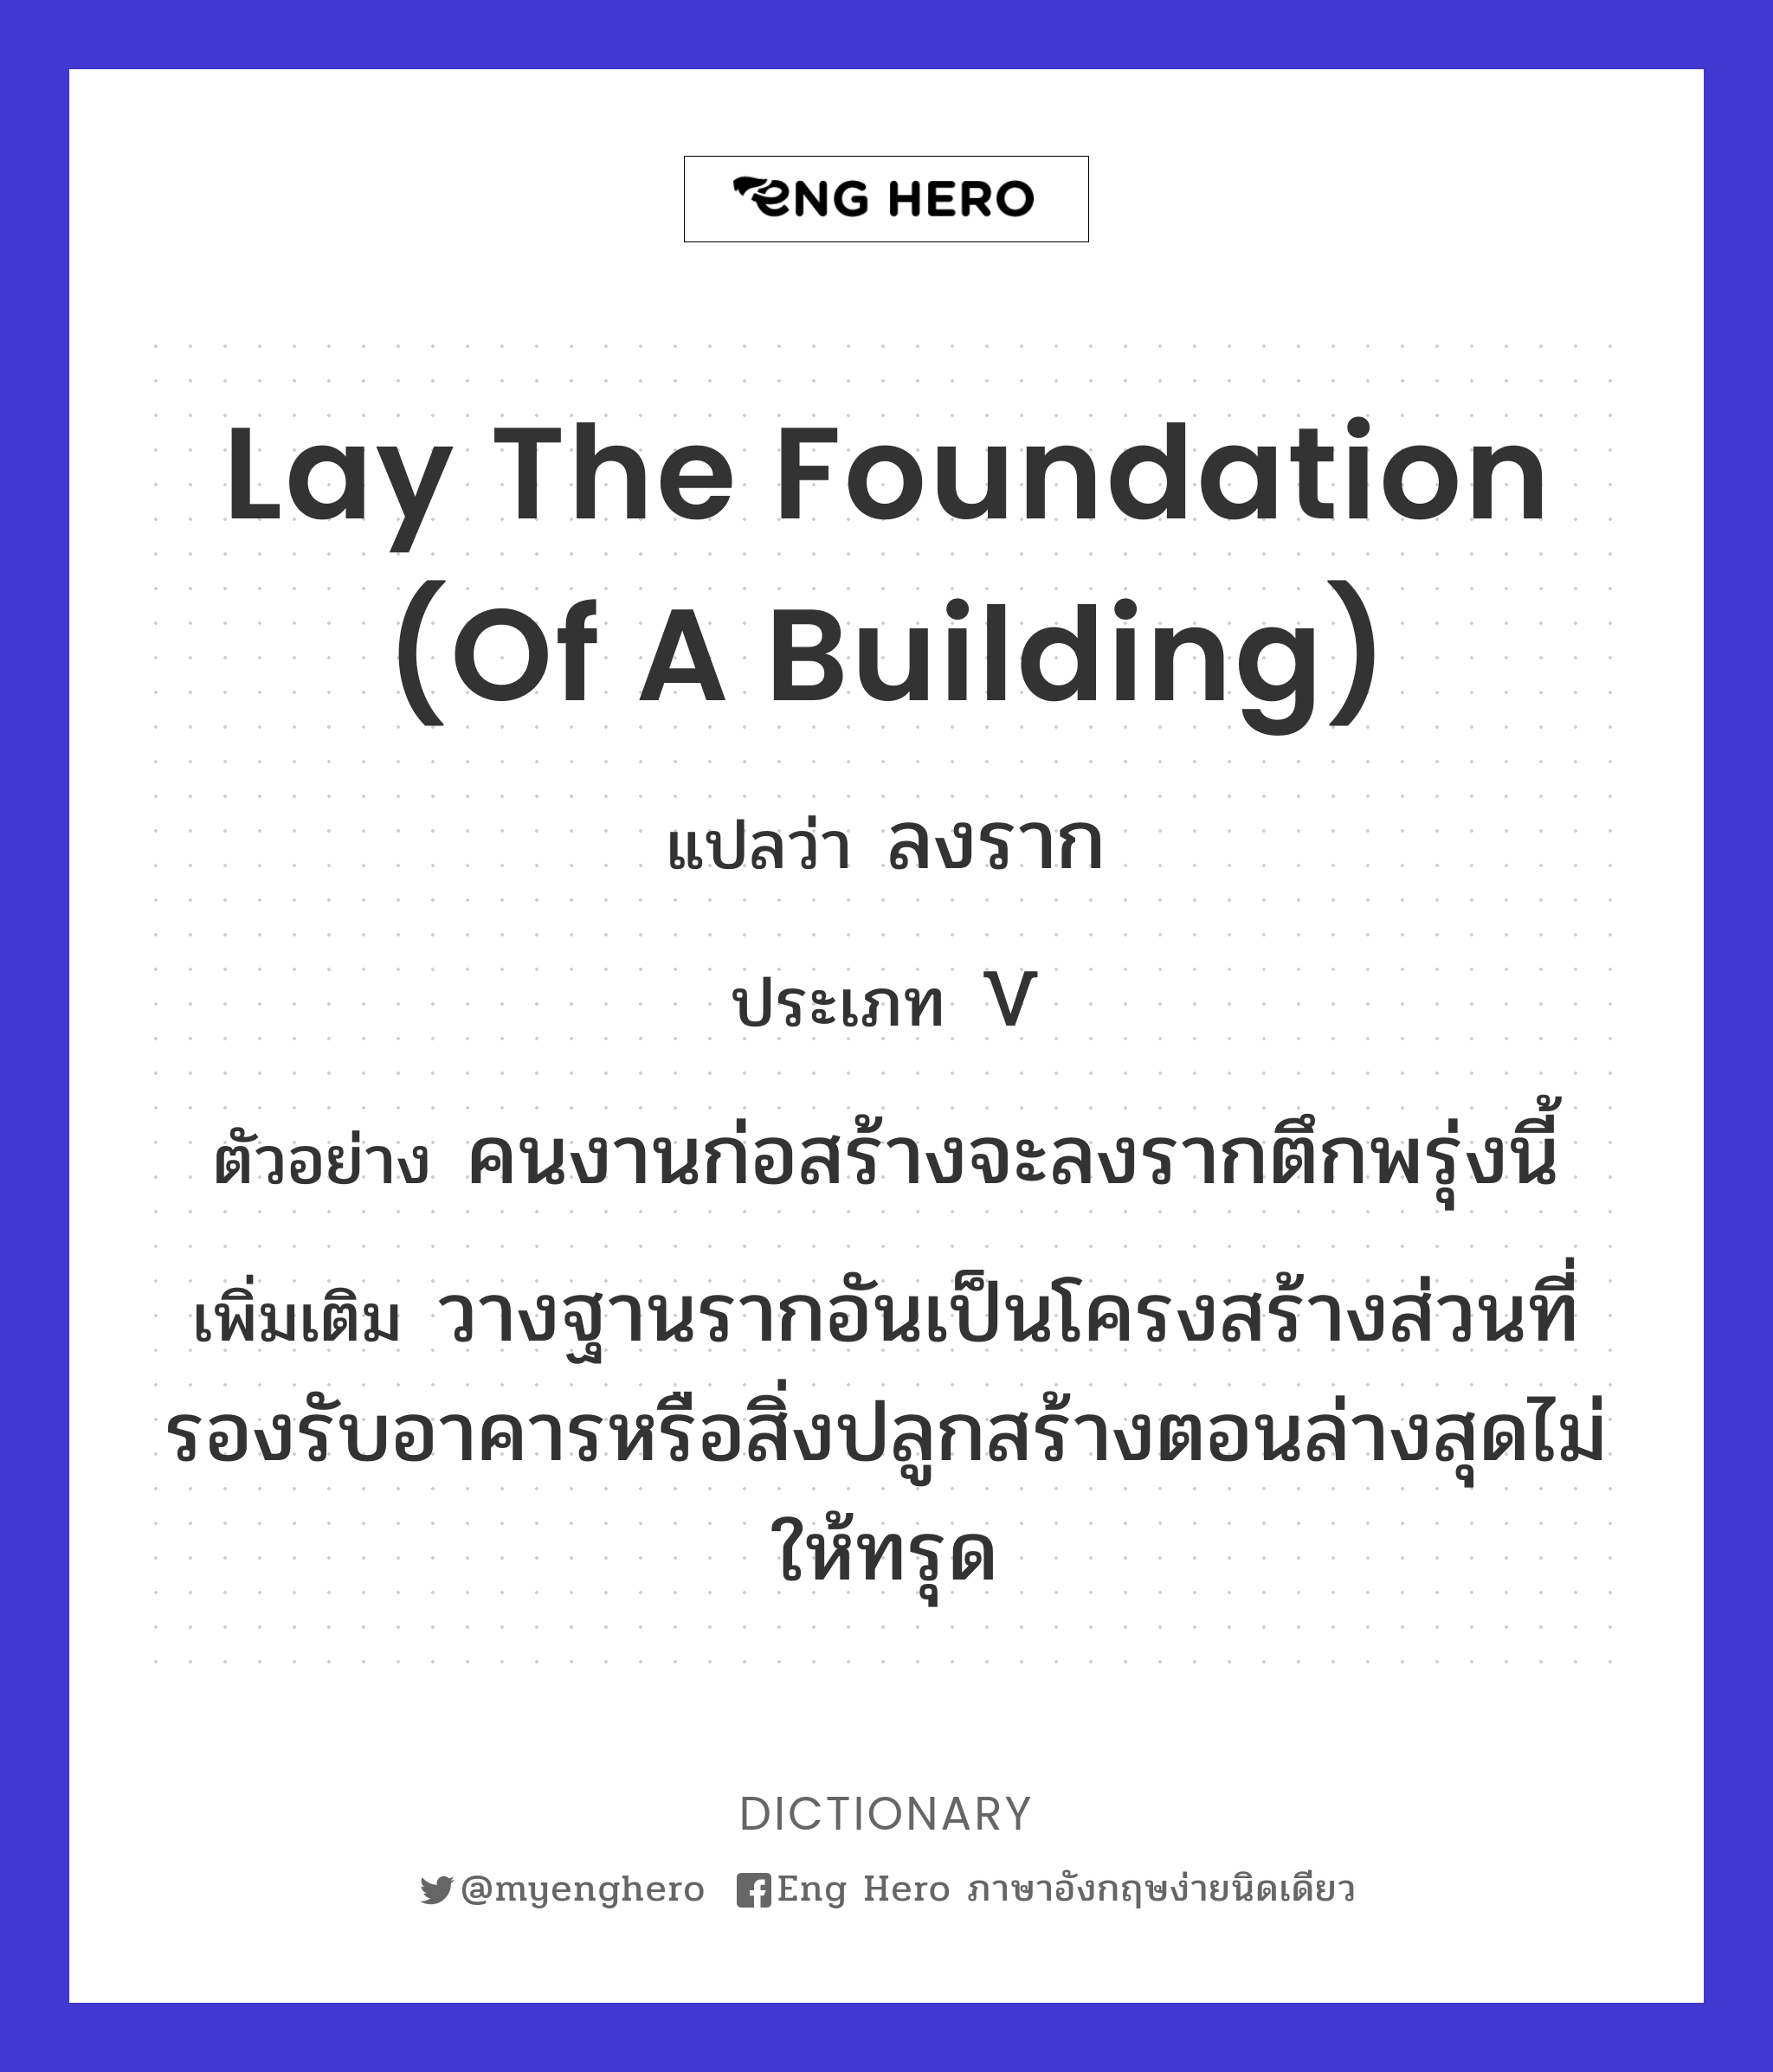 lay the foundation (of a building)